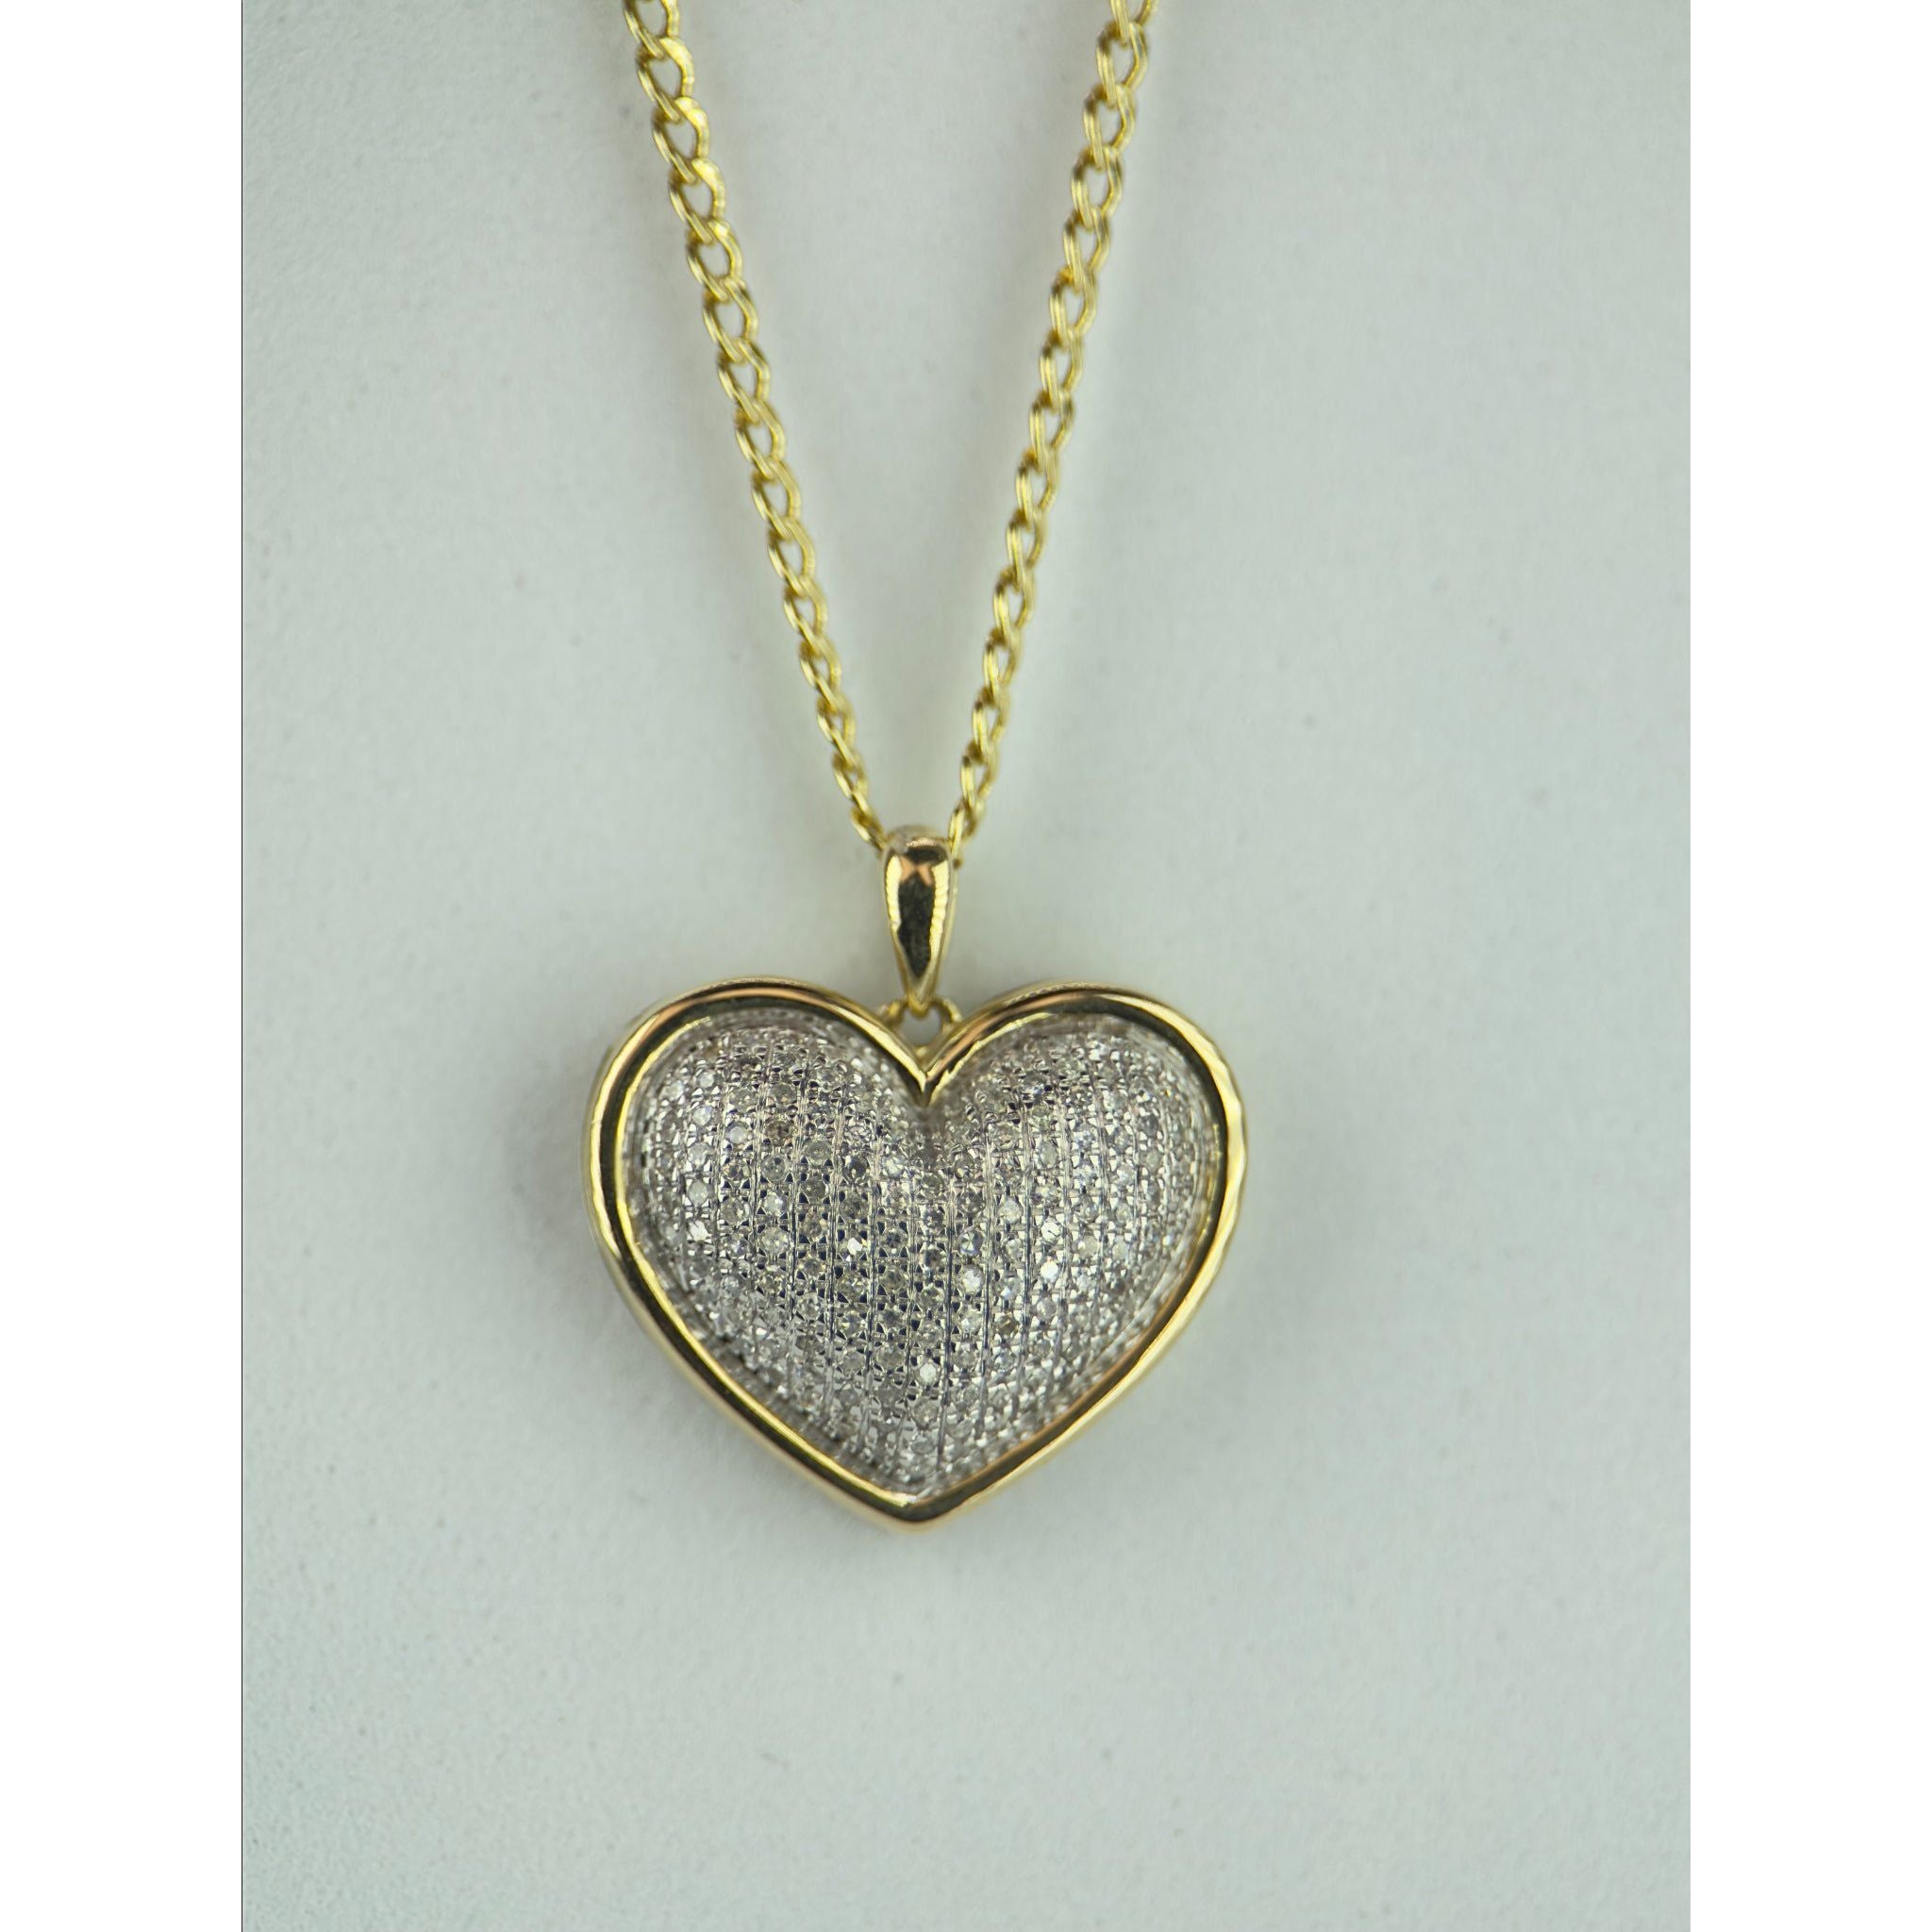 DR2209 - 10K Yellow Gold - Diamond - Pendant and Chain